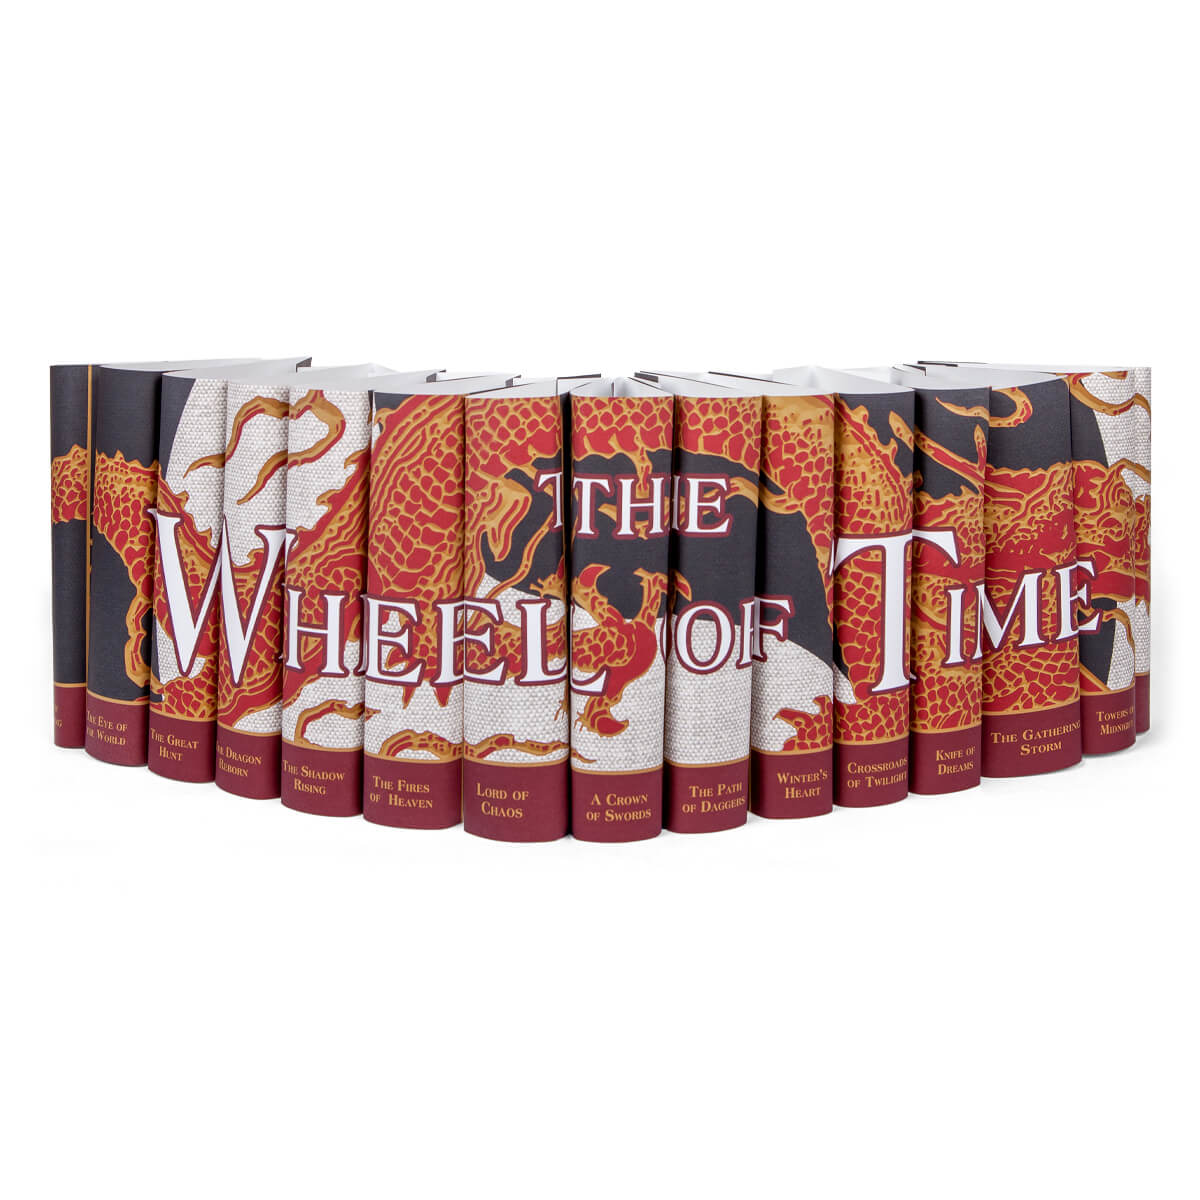 Customized The Wheel of Time - Jackets Only Set